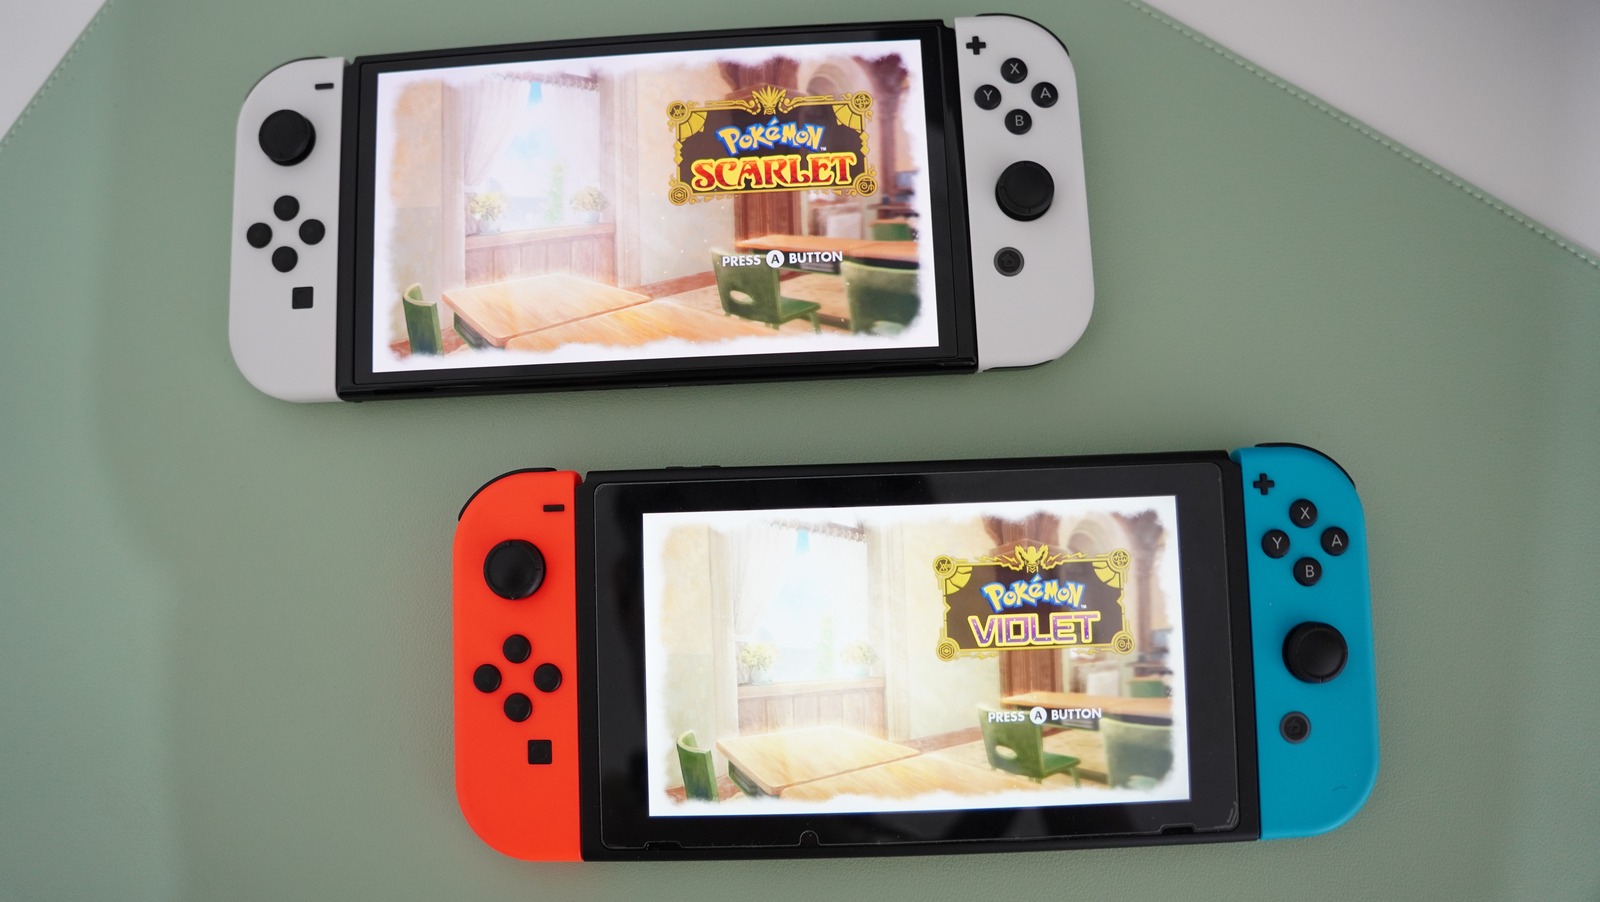 How to Add a User to Nintendo Switch